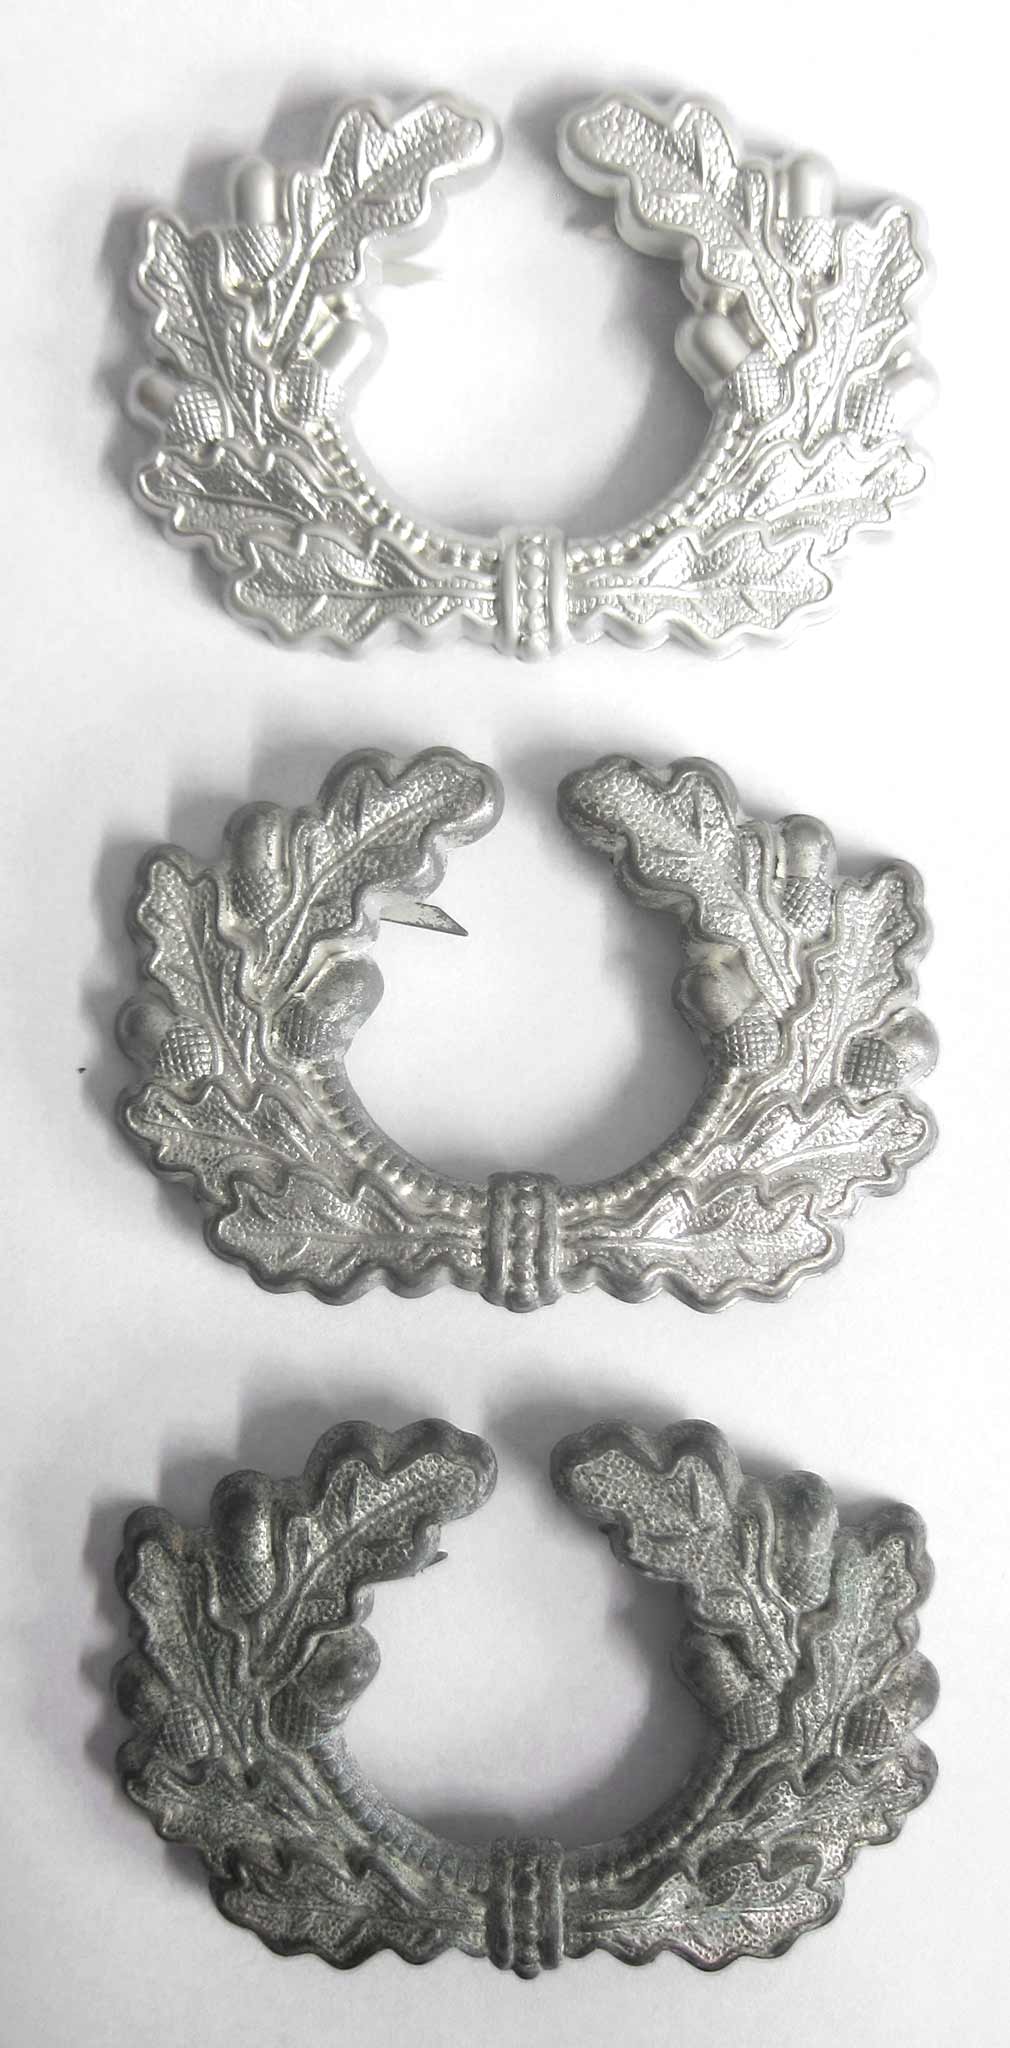 Heer Army Open Wreath in Silvered Metal - New, Lightly Worn & Aged 